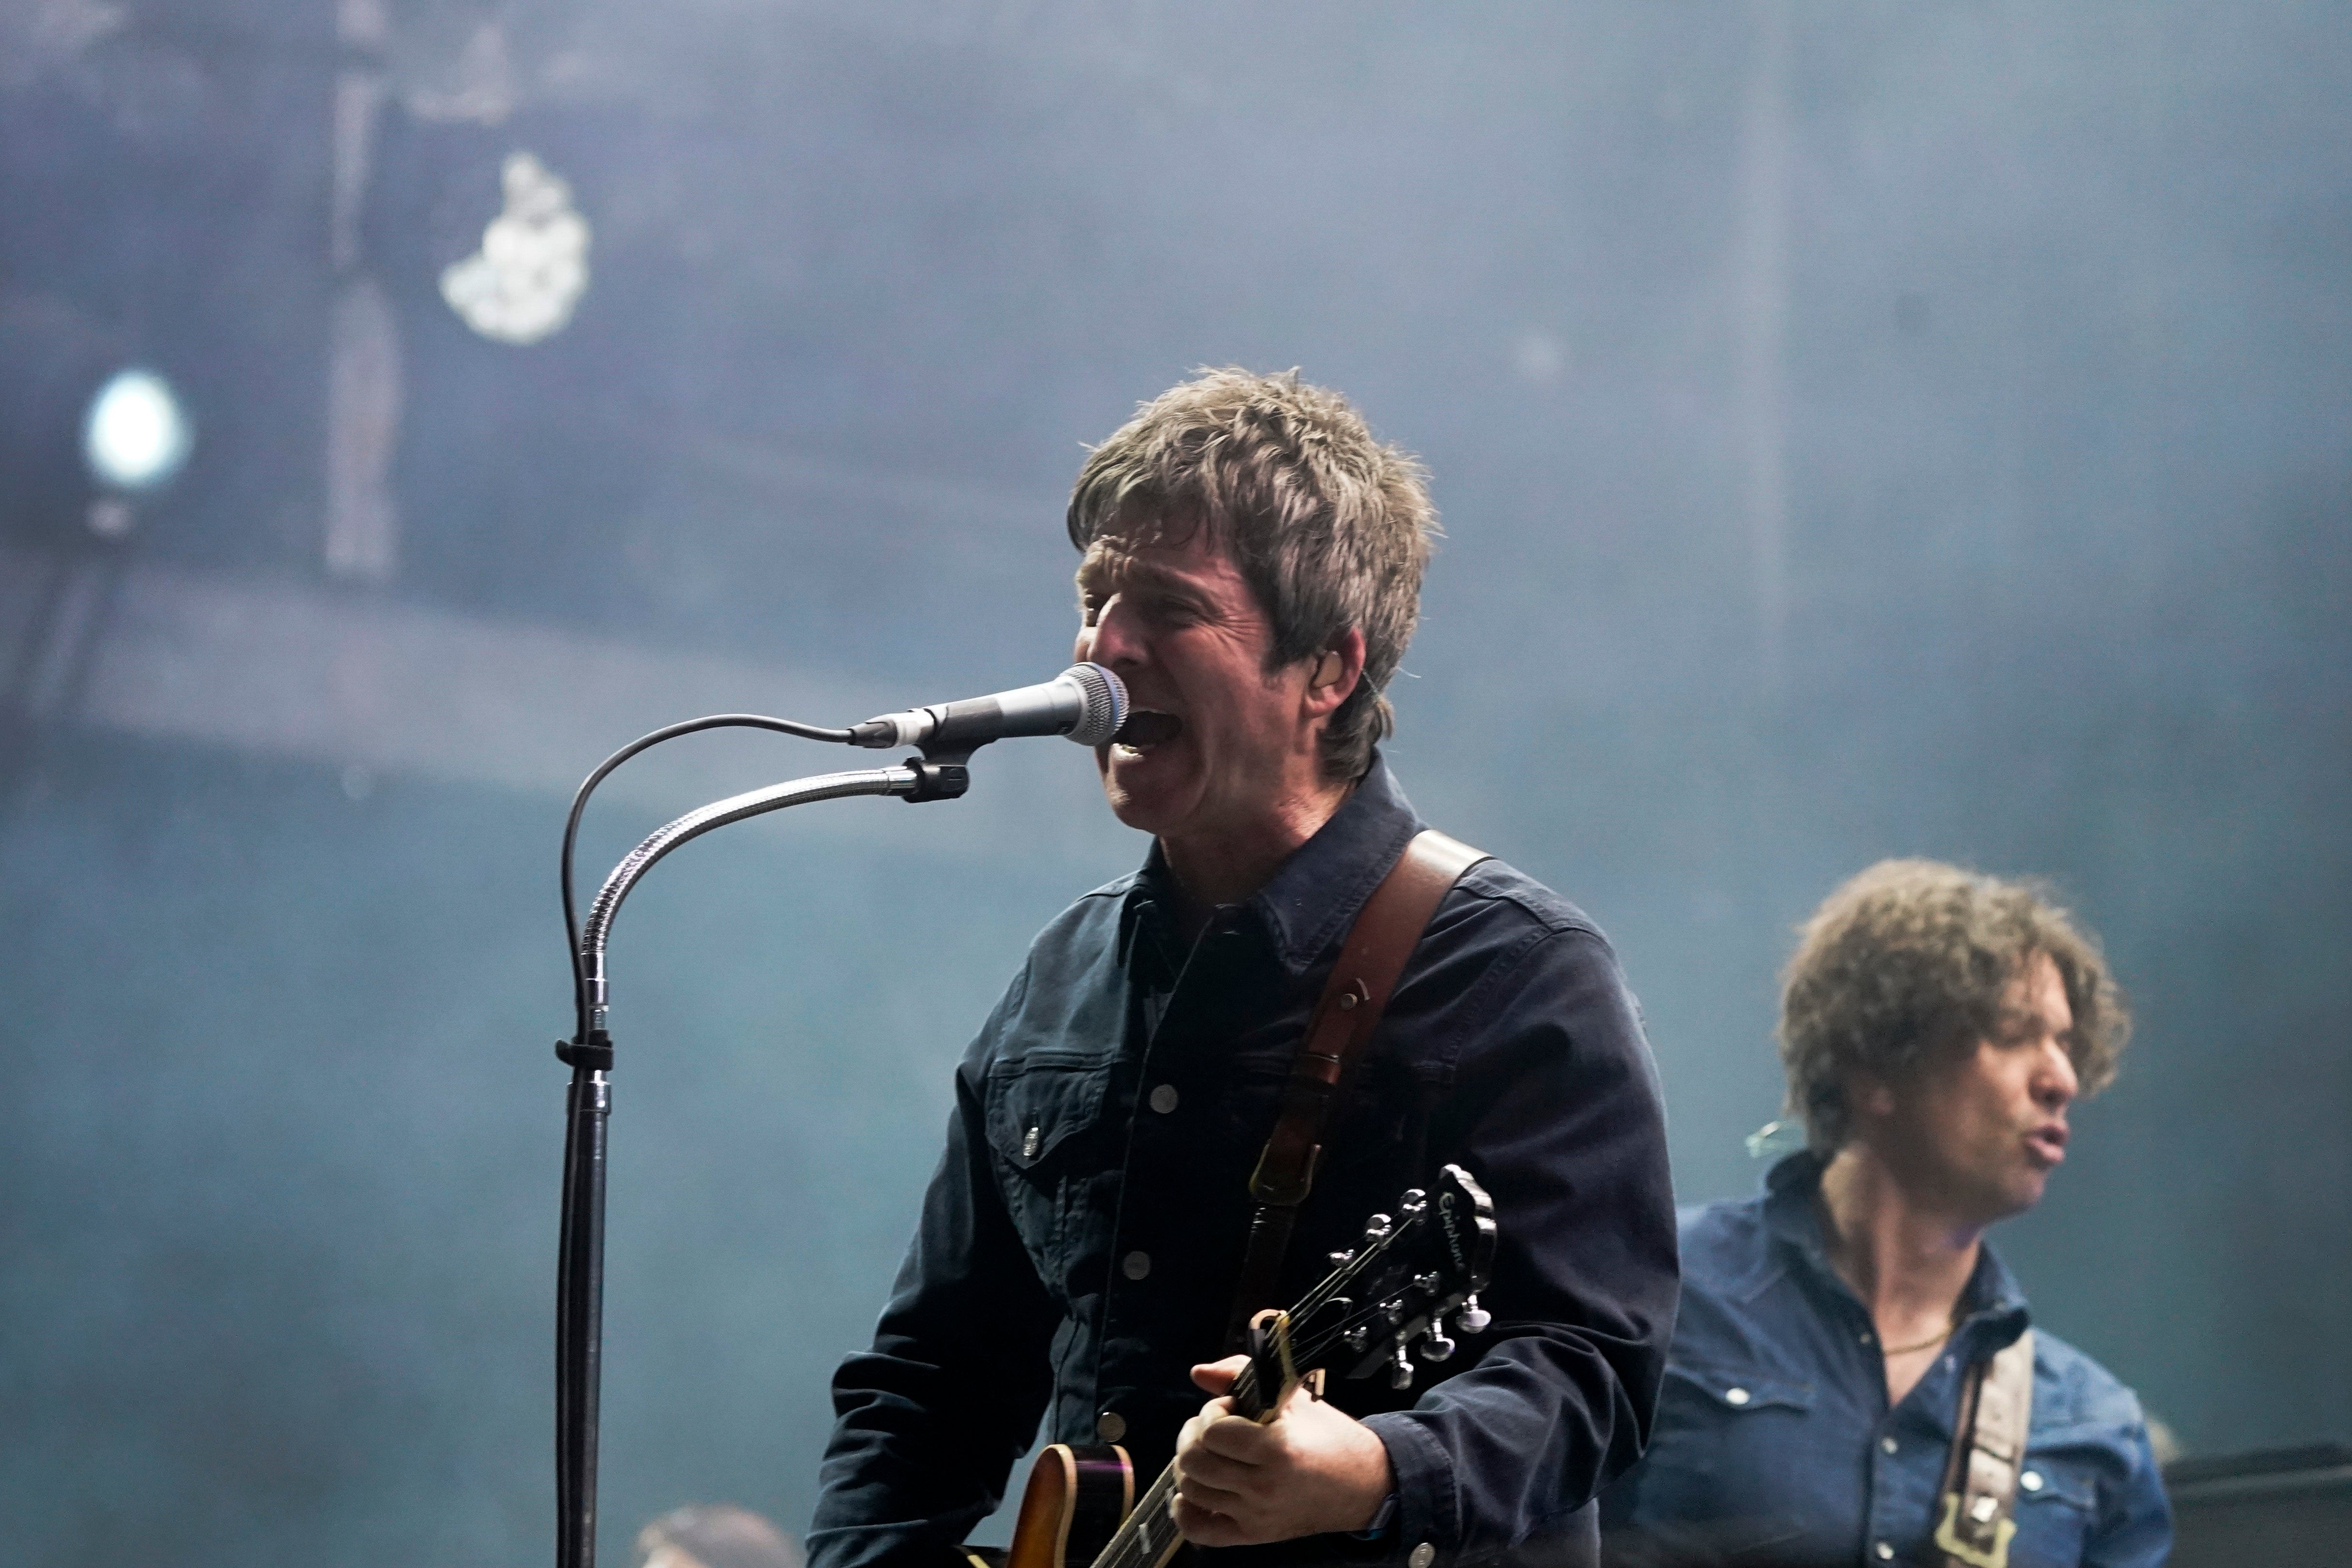 Noel Gallagher performing with his band the High Flying Birds